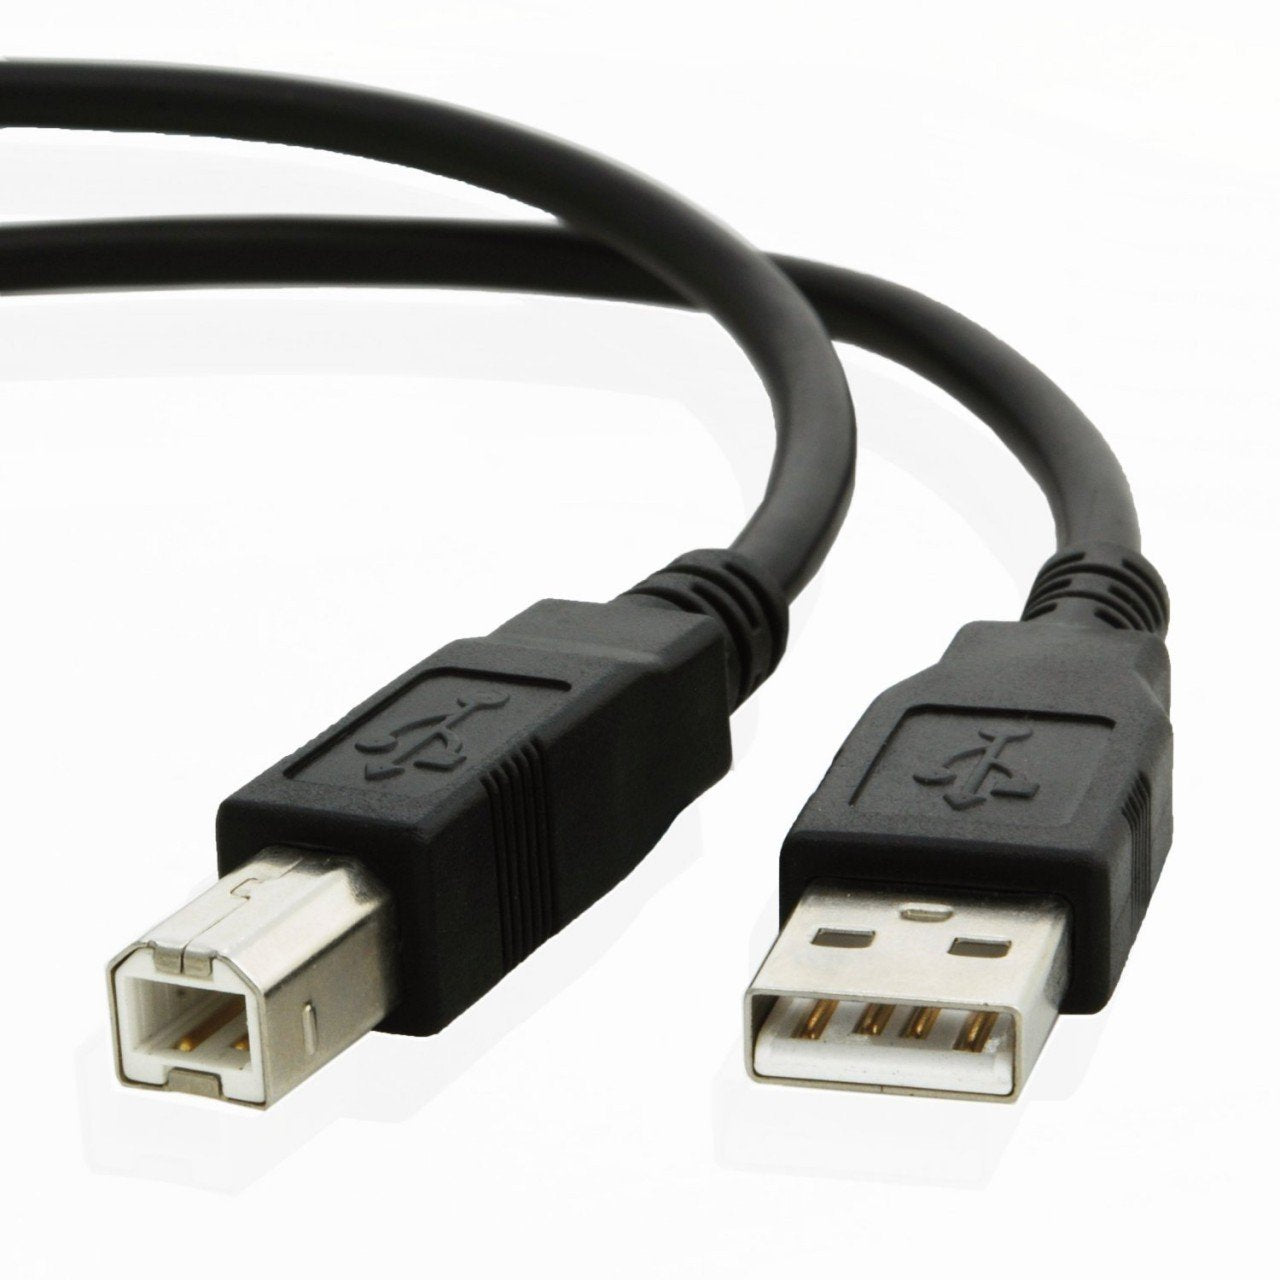 USB cable for Dell B5465dnf